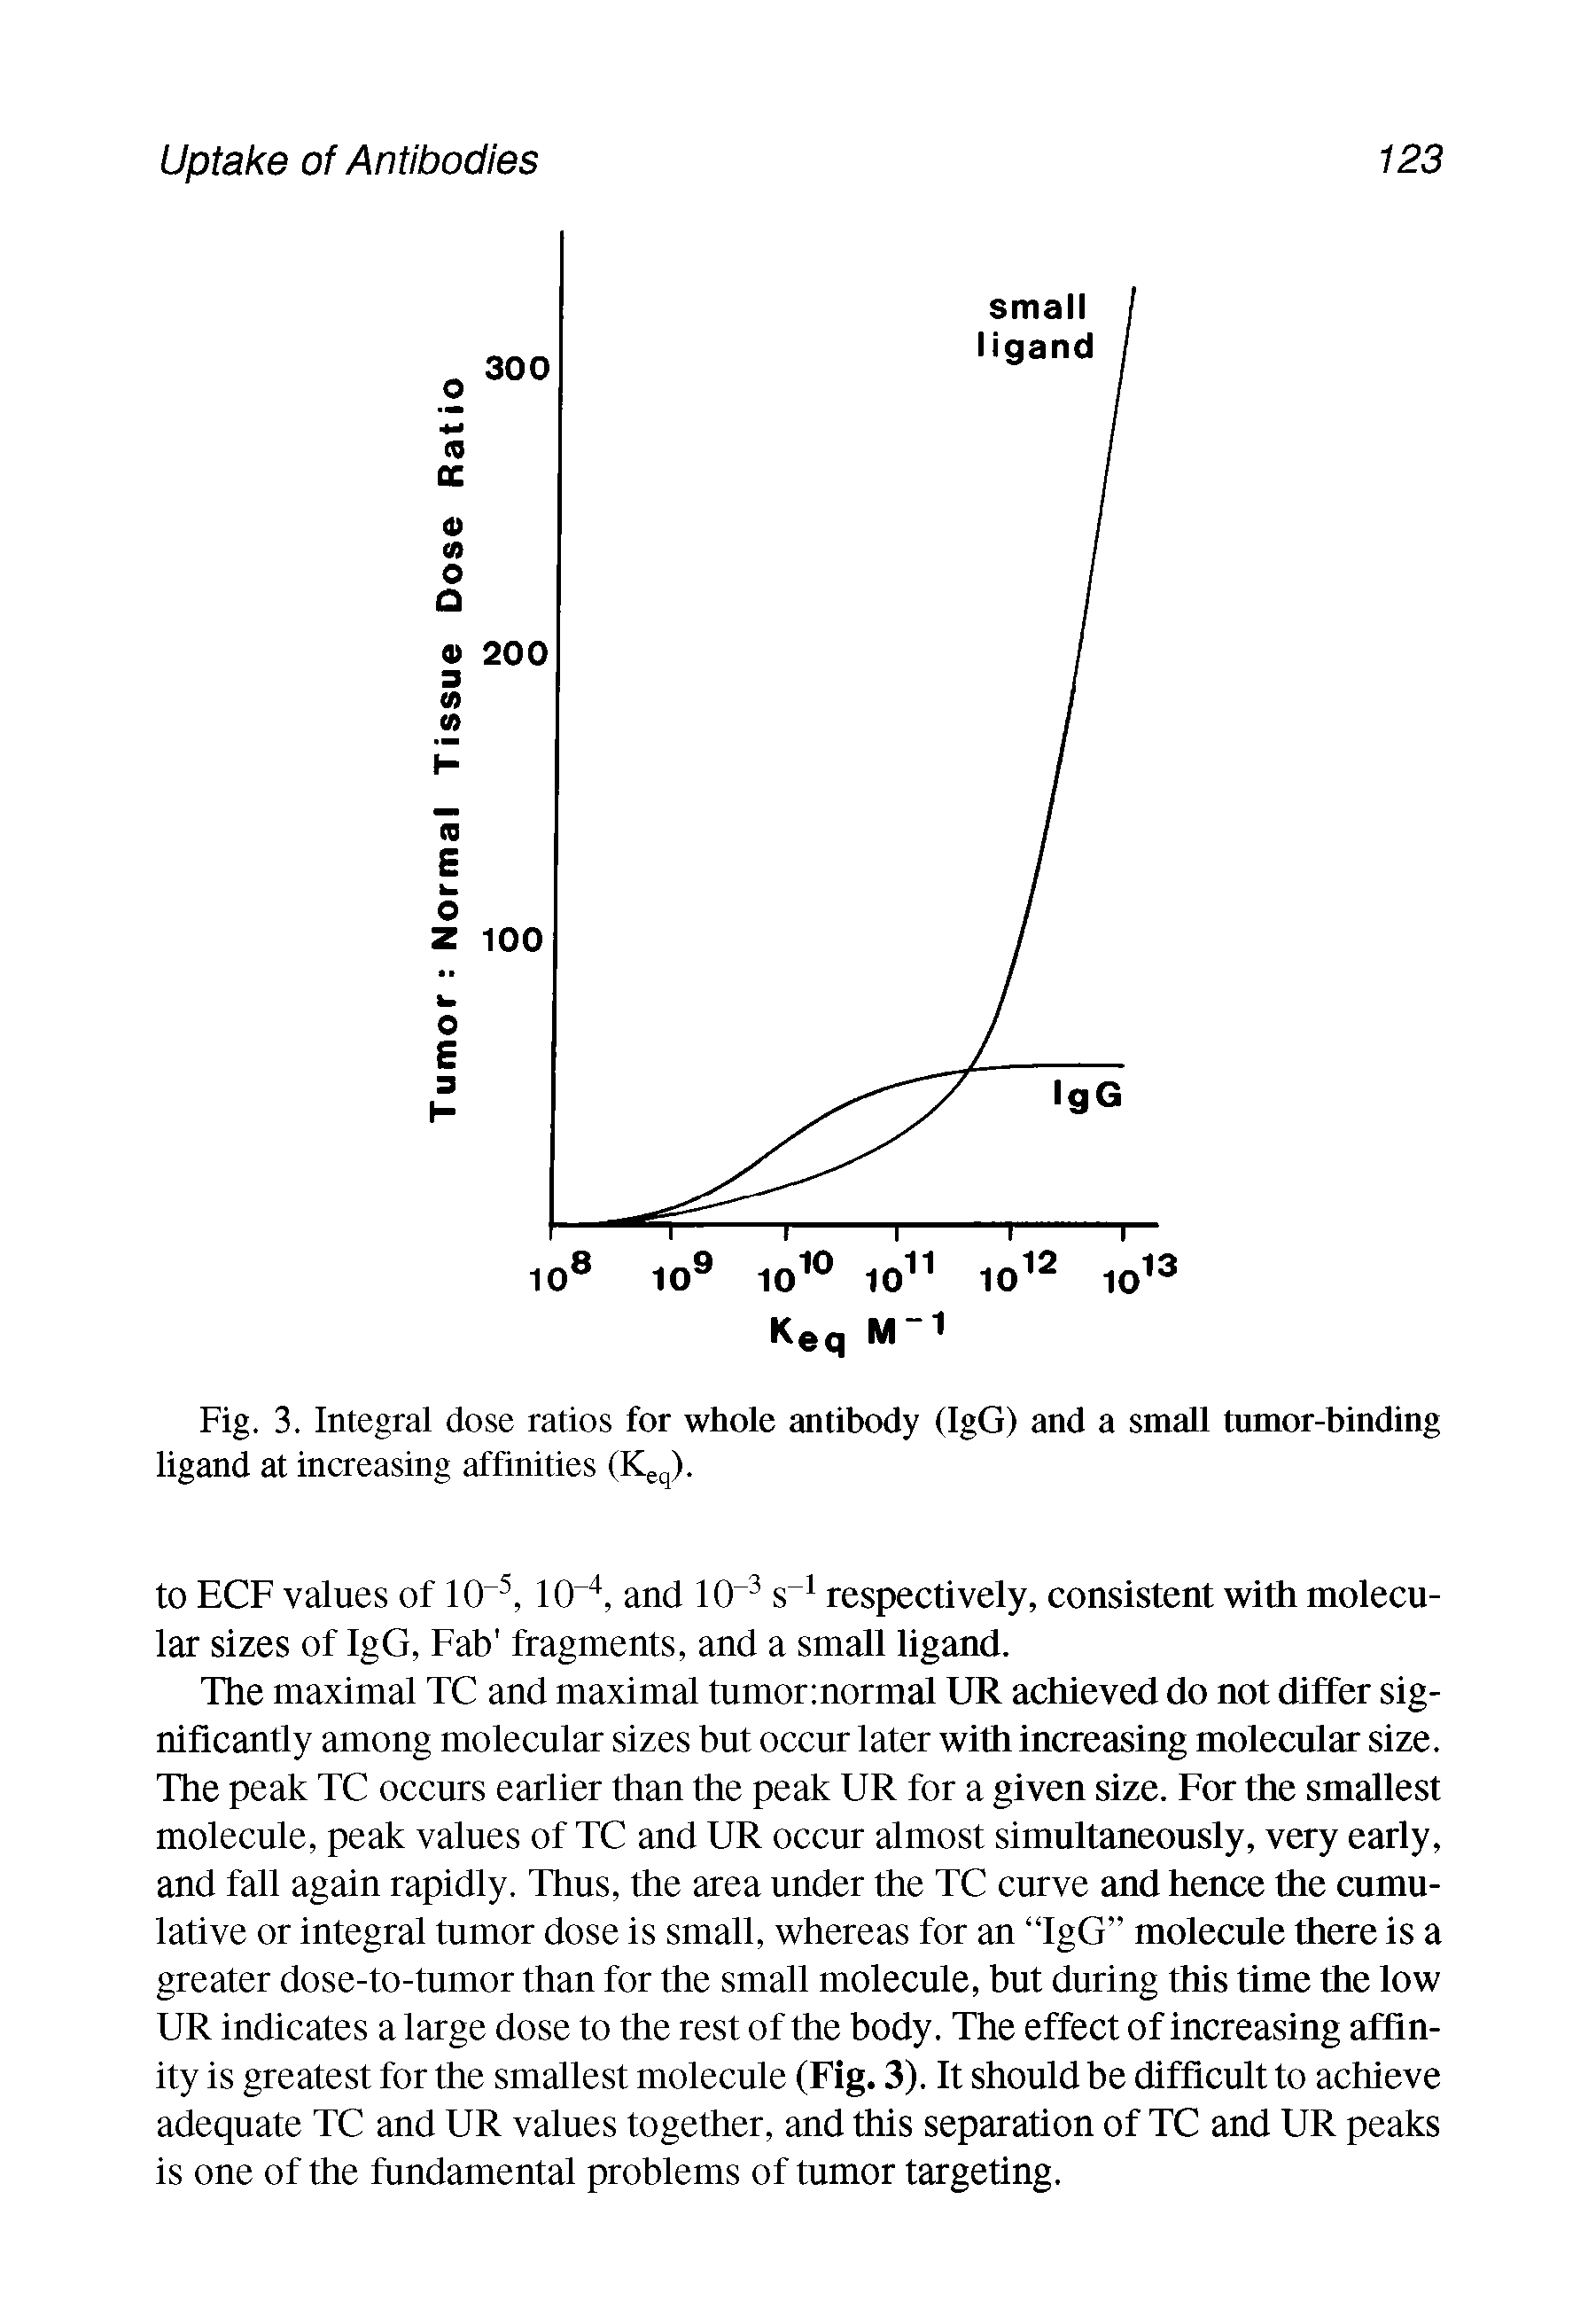 Fig. 3. Integral dose ratios for whole antibody (IgG) and a small tumor-binding ligand at increasing affinities (Keq).